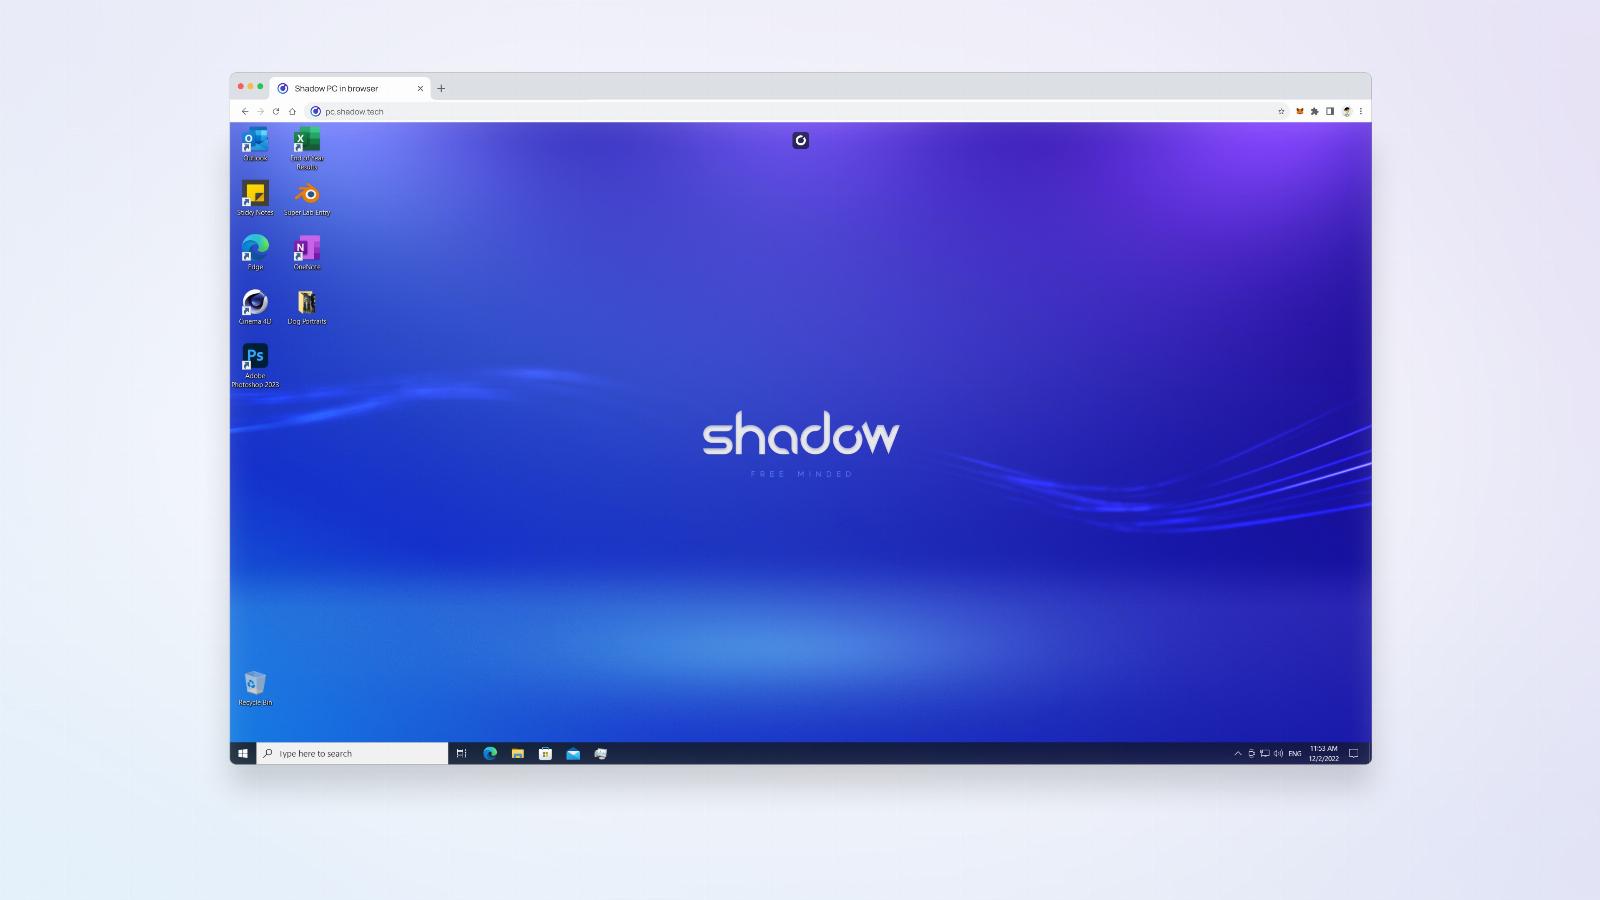 Cloud gaming firm Shadow says hackers stole customers’ personal data